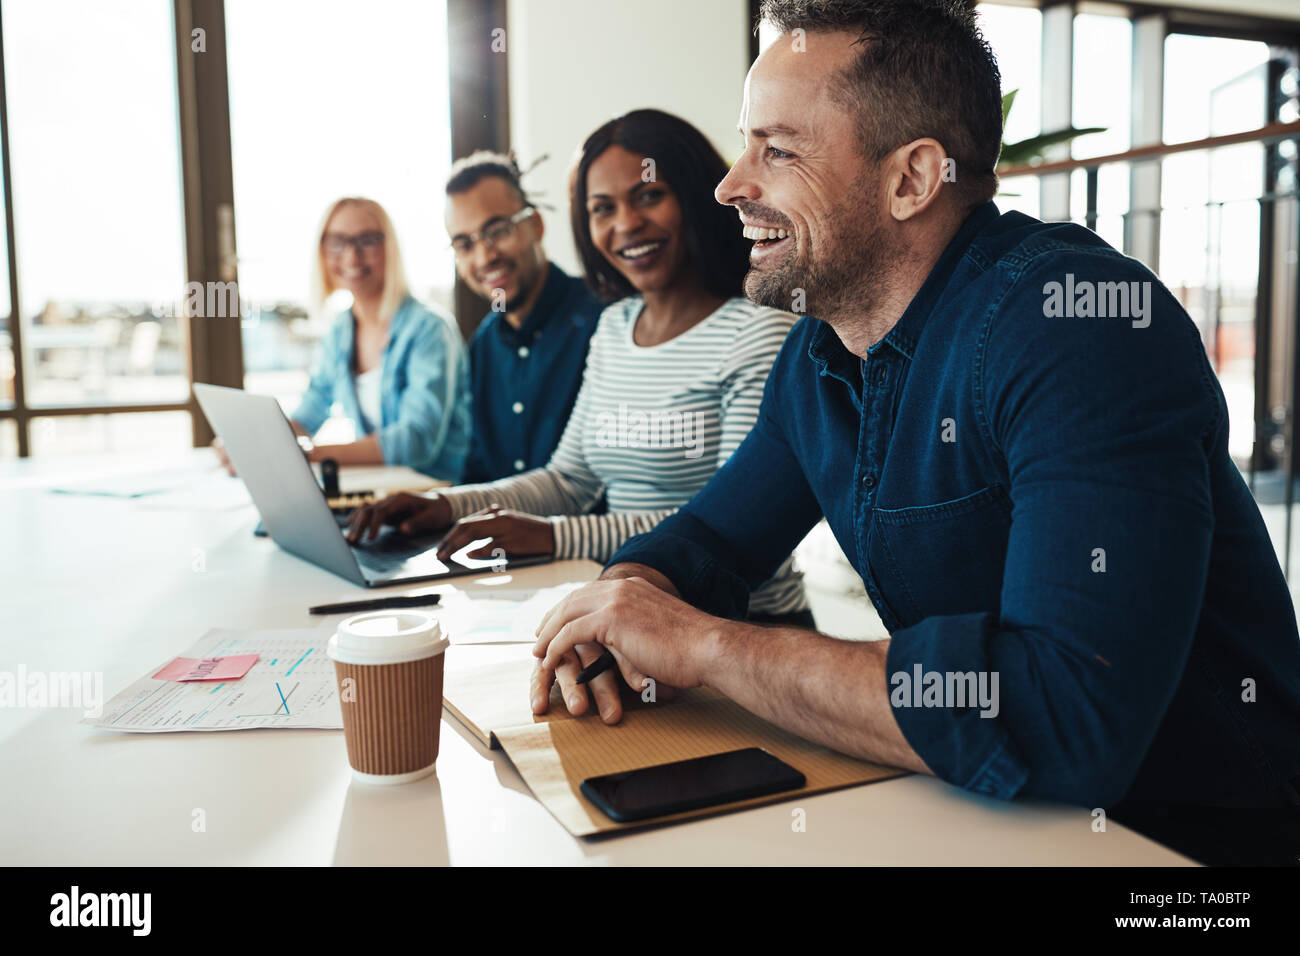 Mature businessman laughing while sitting with a diverse group of coworkers during a meeting in an office Stock Photo